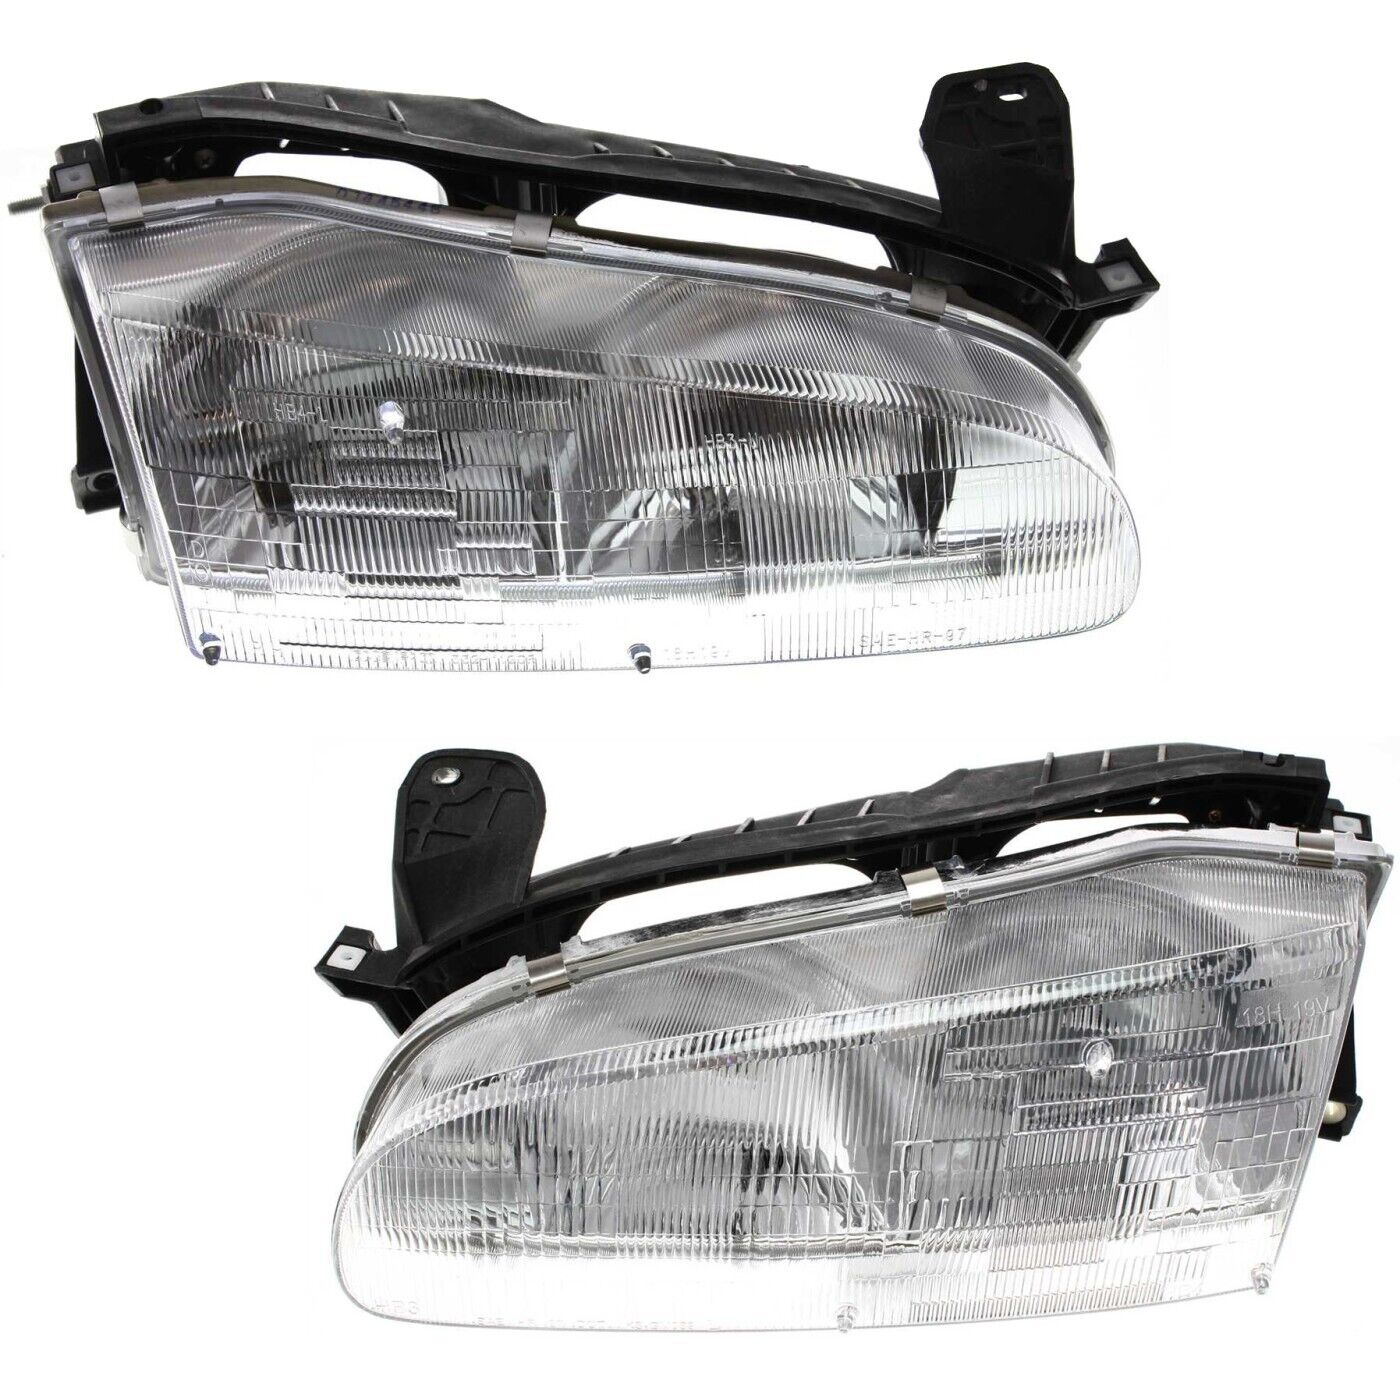 Headlight Set For 93 94 95 96 97 Geo Prizm Left and Right With Bulb 2Pc